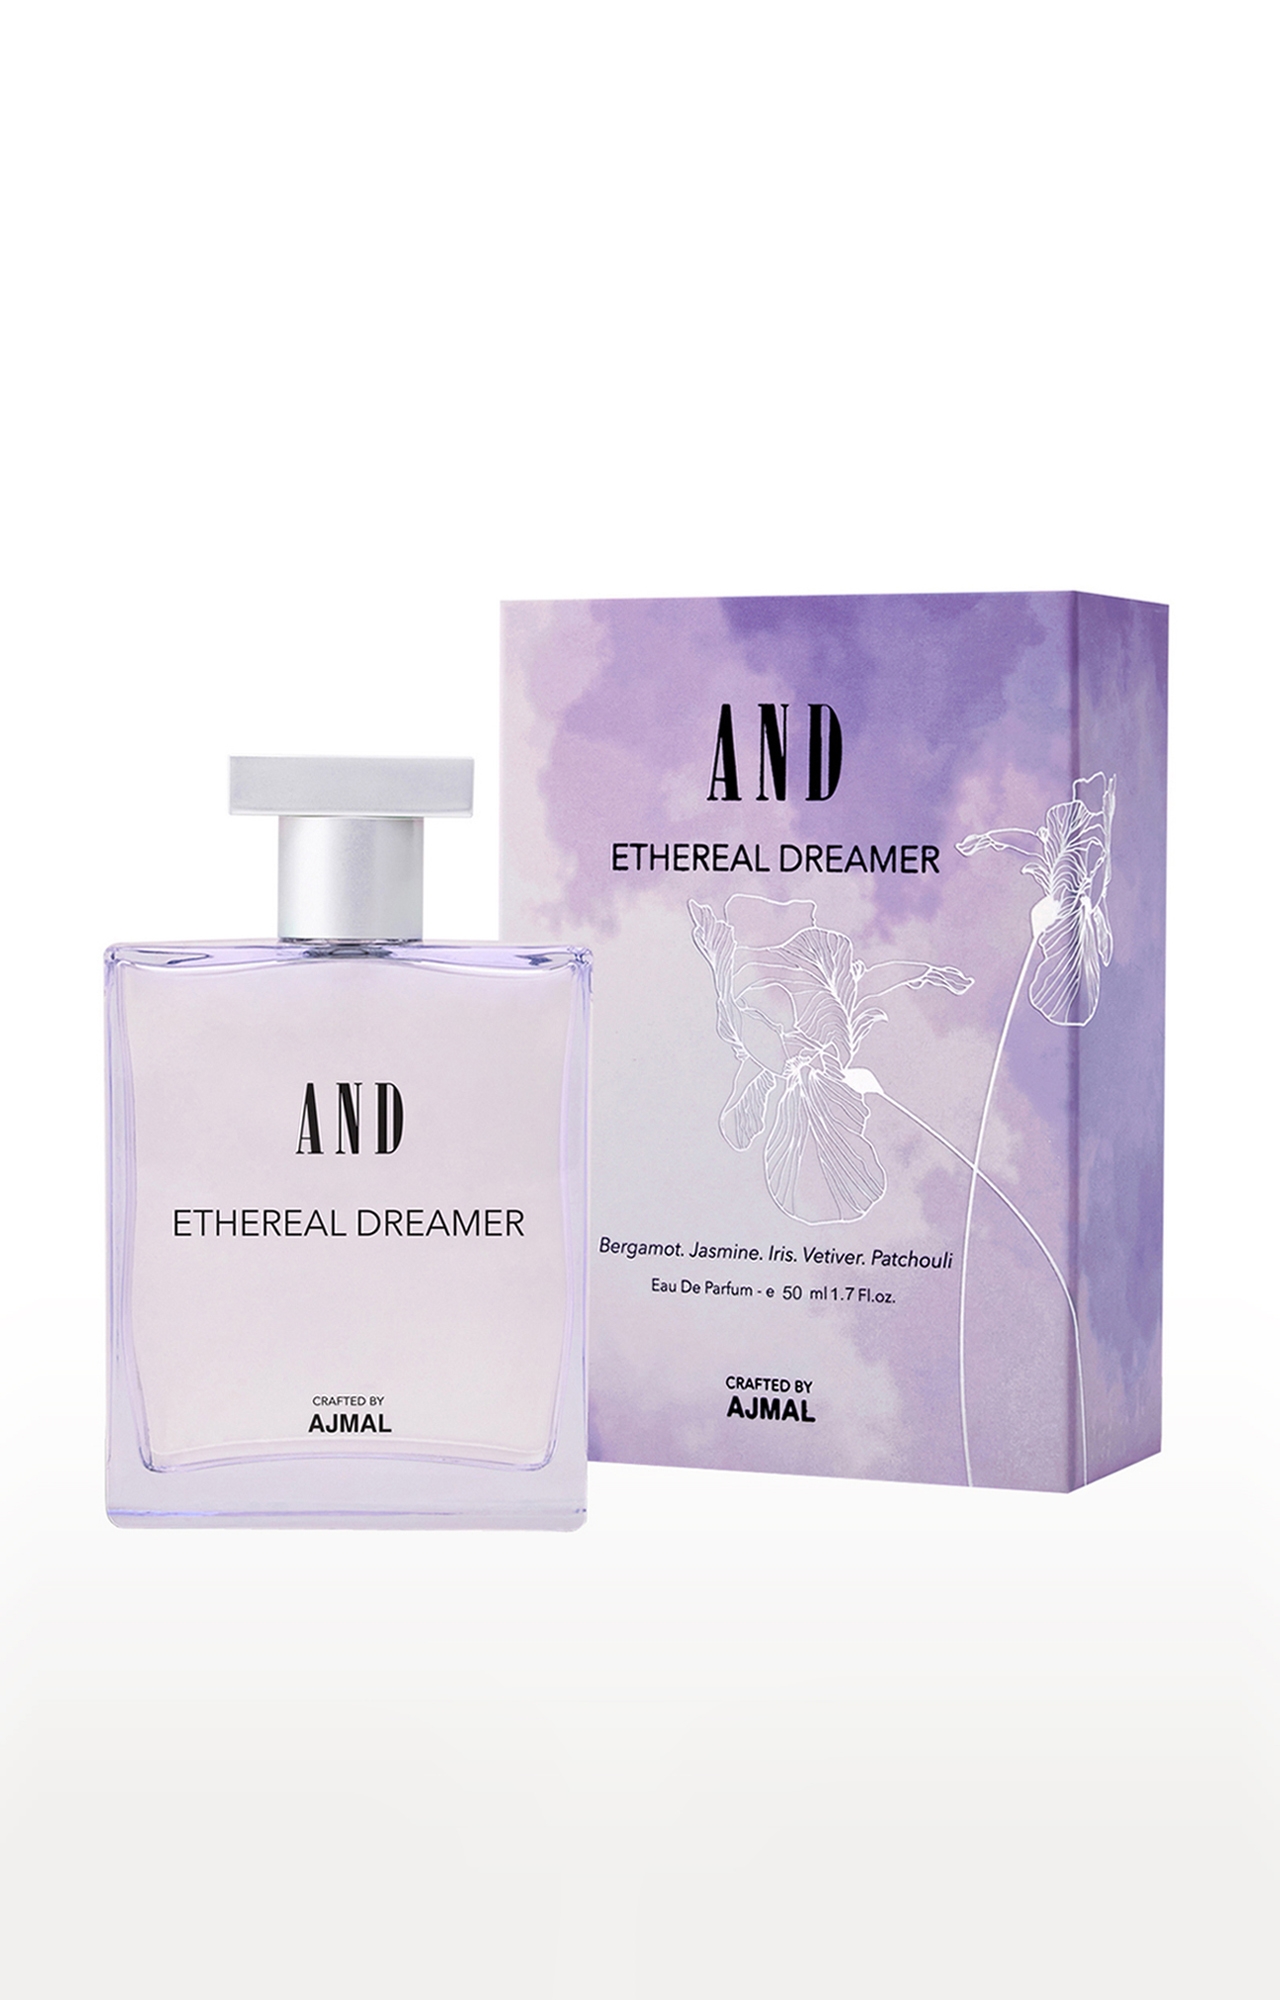 And Ethereal Dreamer Eau De Parfum 50ML Long Lasting Scent Spray Gift For Women Crafted By Ajmal